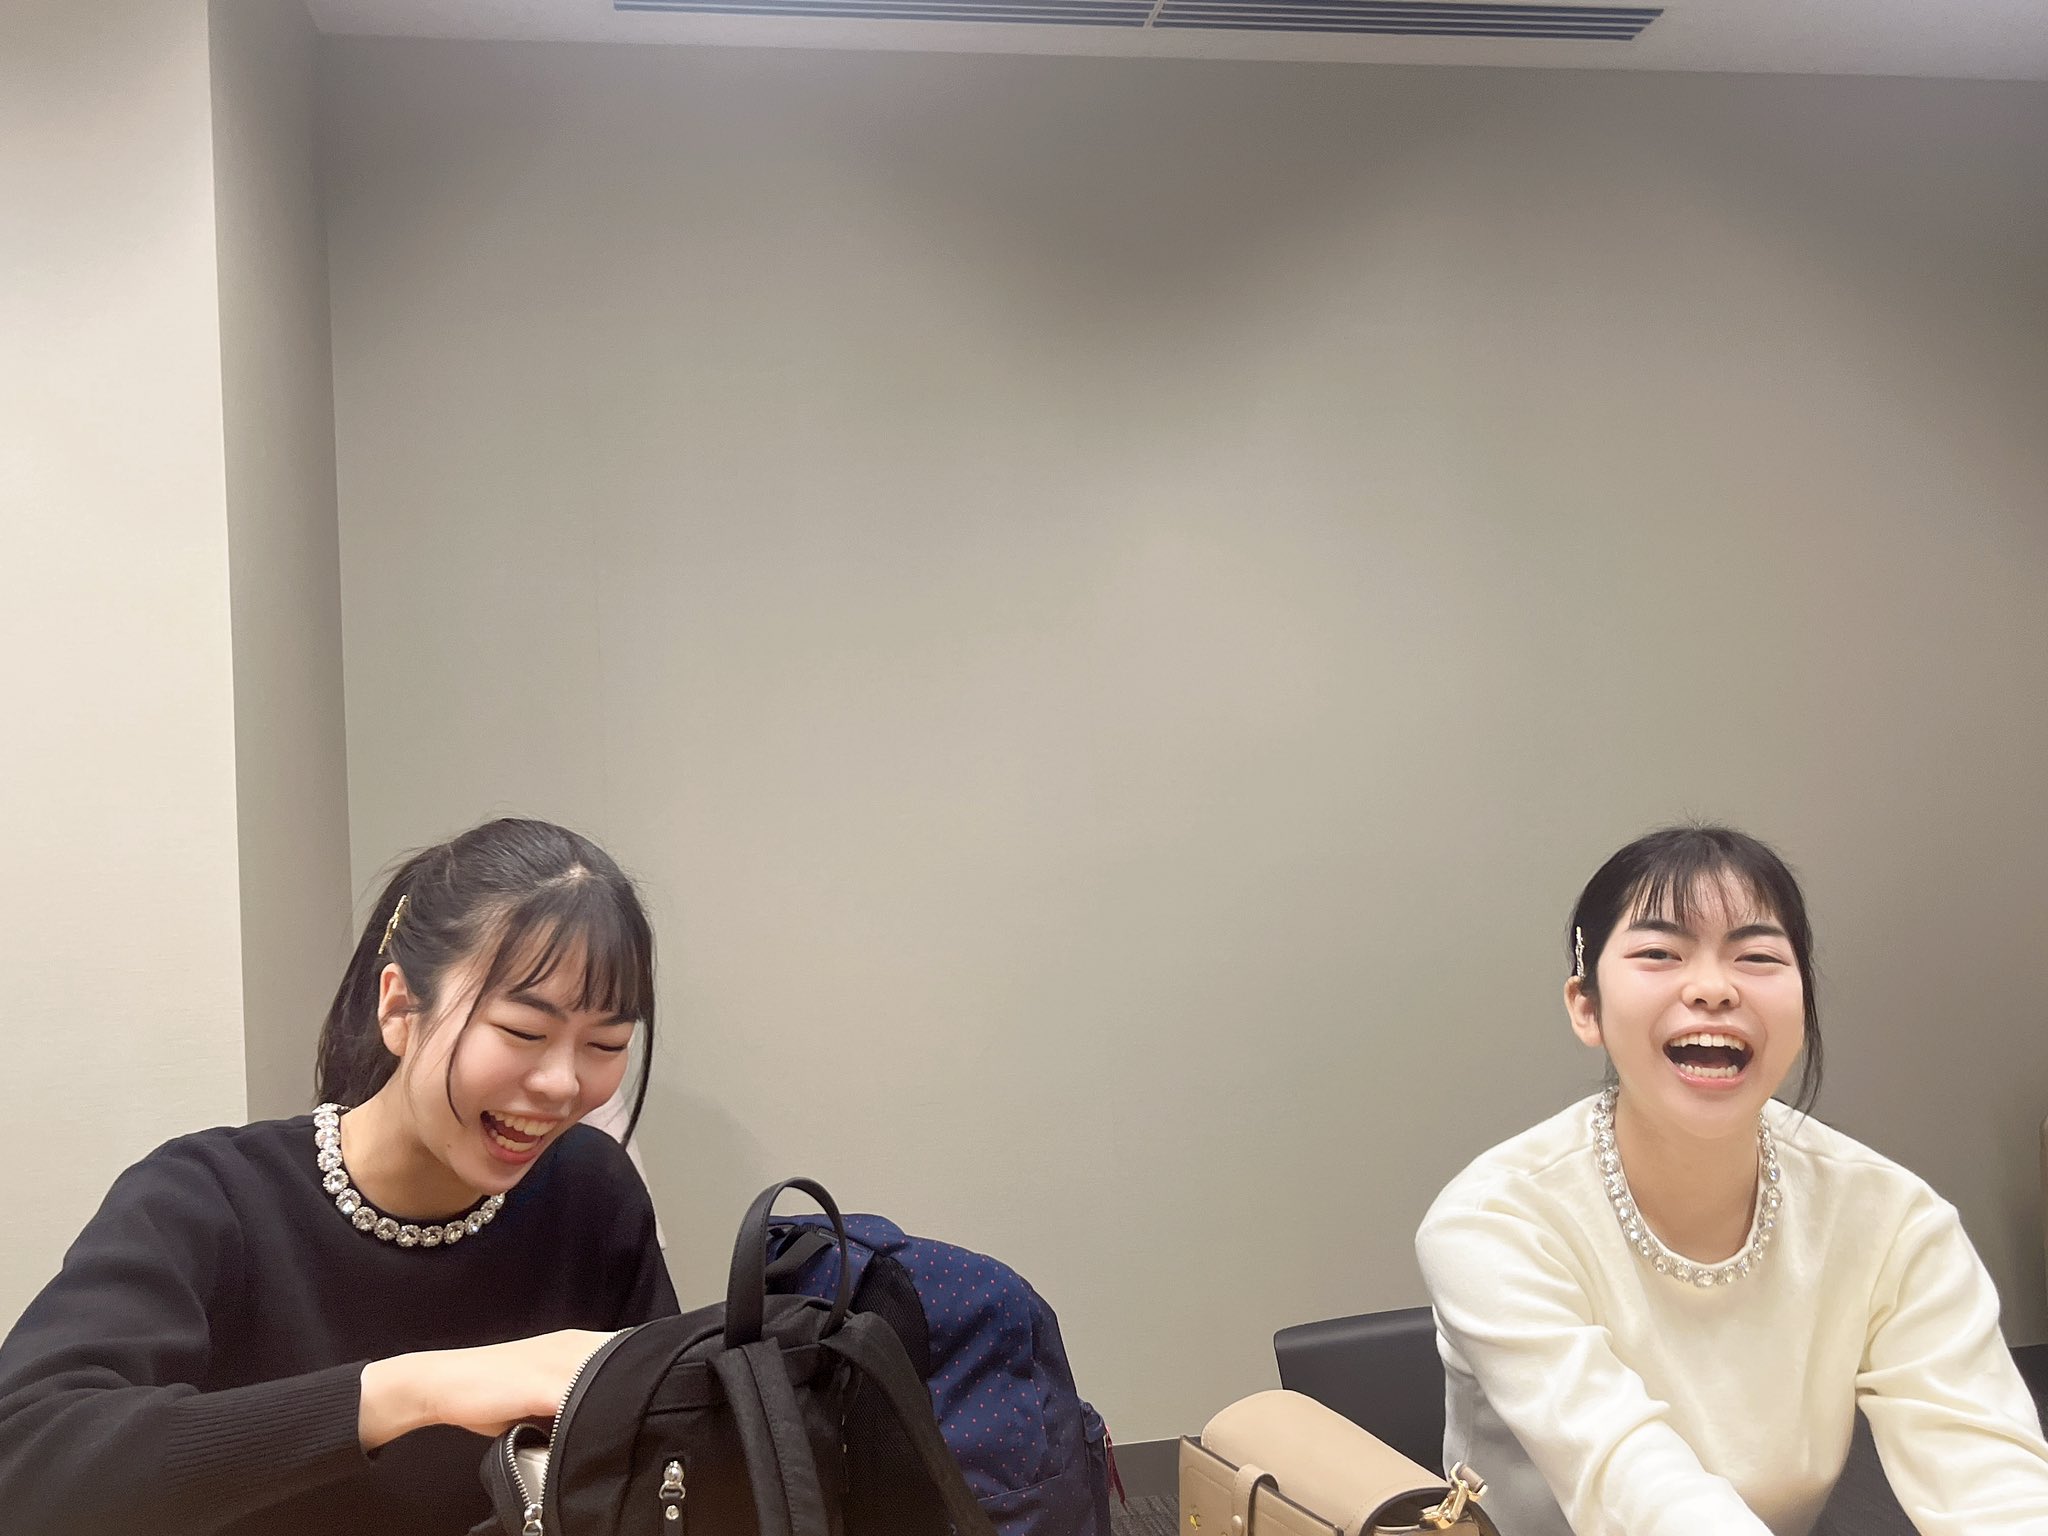 The two Ueno sisters 8 and 9 amused, 2023 (Image credit: Fujisawa Rina Twitter)